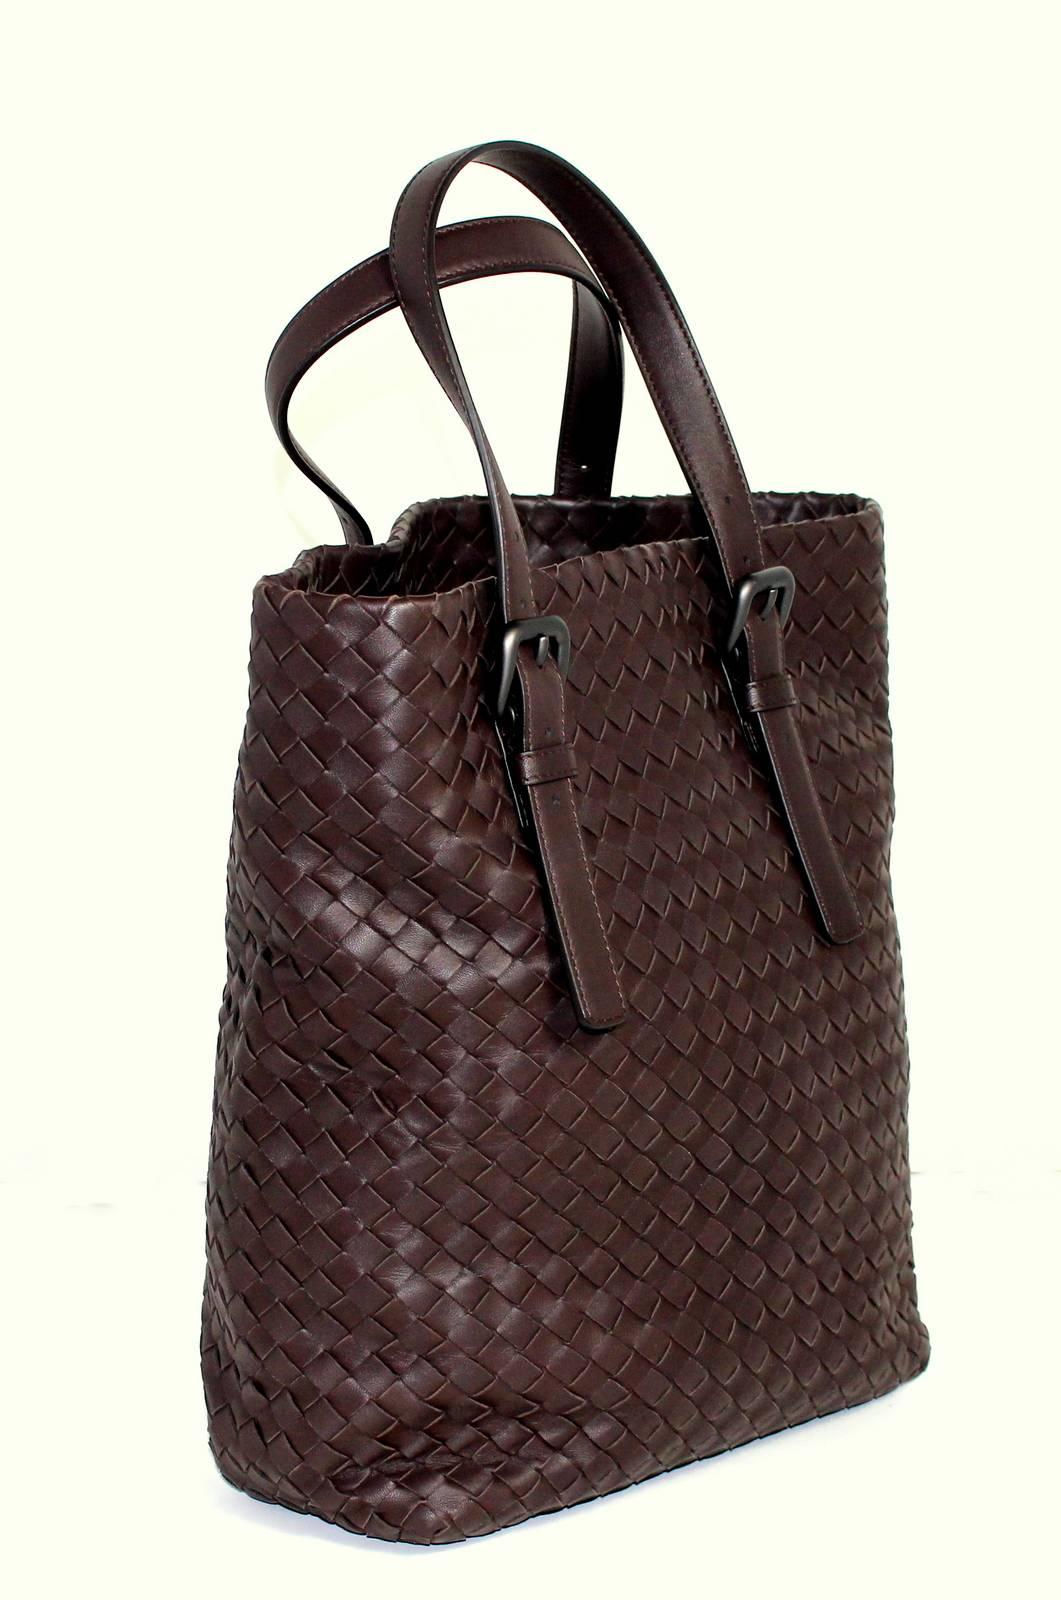 Bottega Veneta Brown Leather Classic Tote- Estimated Current Value $2,400
EXCELLENT overall condition.  Minor corner wear and creasing from storage. 
 
Rich brown leather bucket style tote is woven in intrecciato style.  Double leather straps